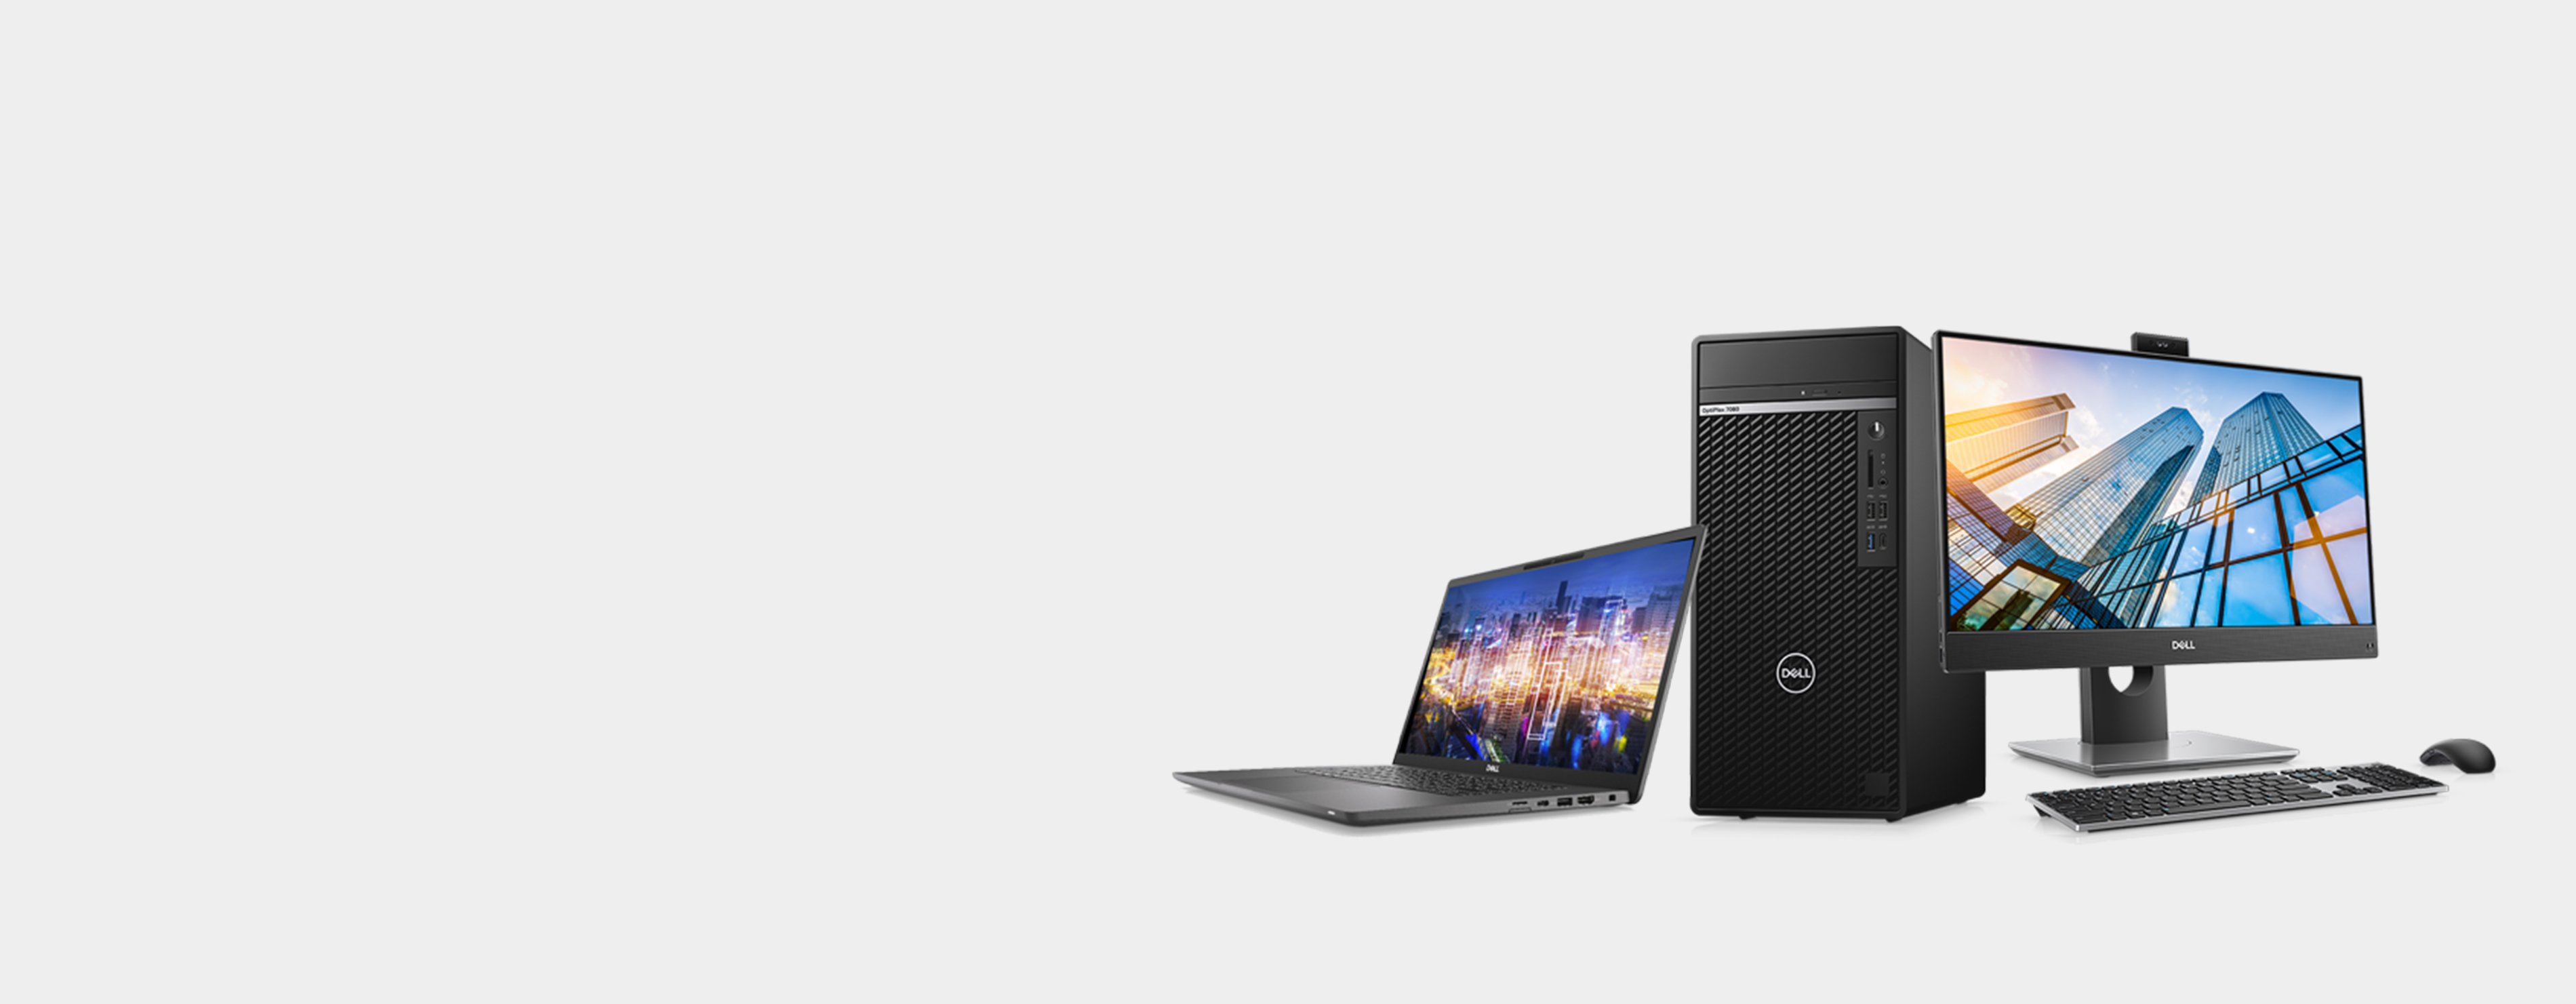 Dell XPS 13 (9300): "For anyone who needs a highly portable powerful laptop." — Finder